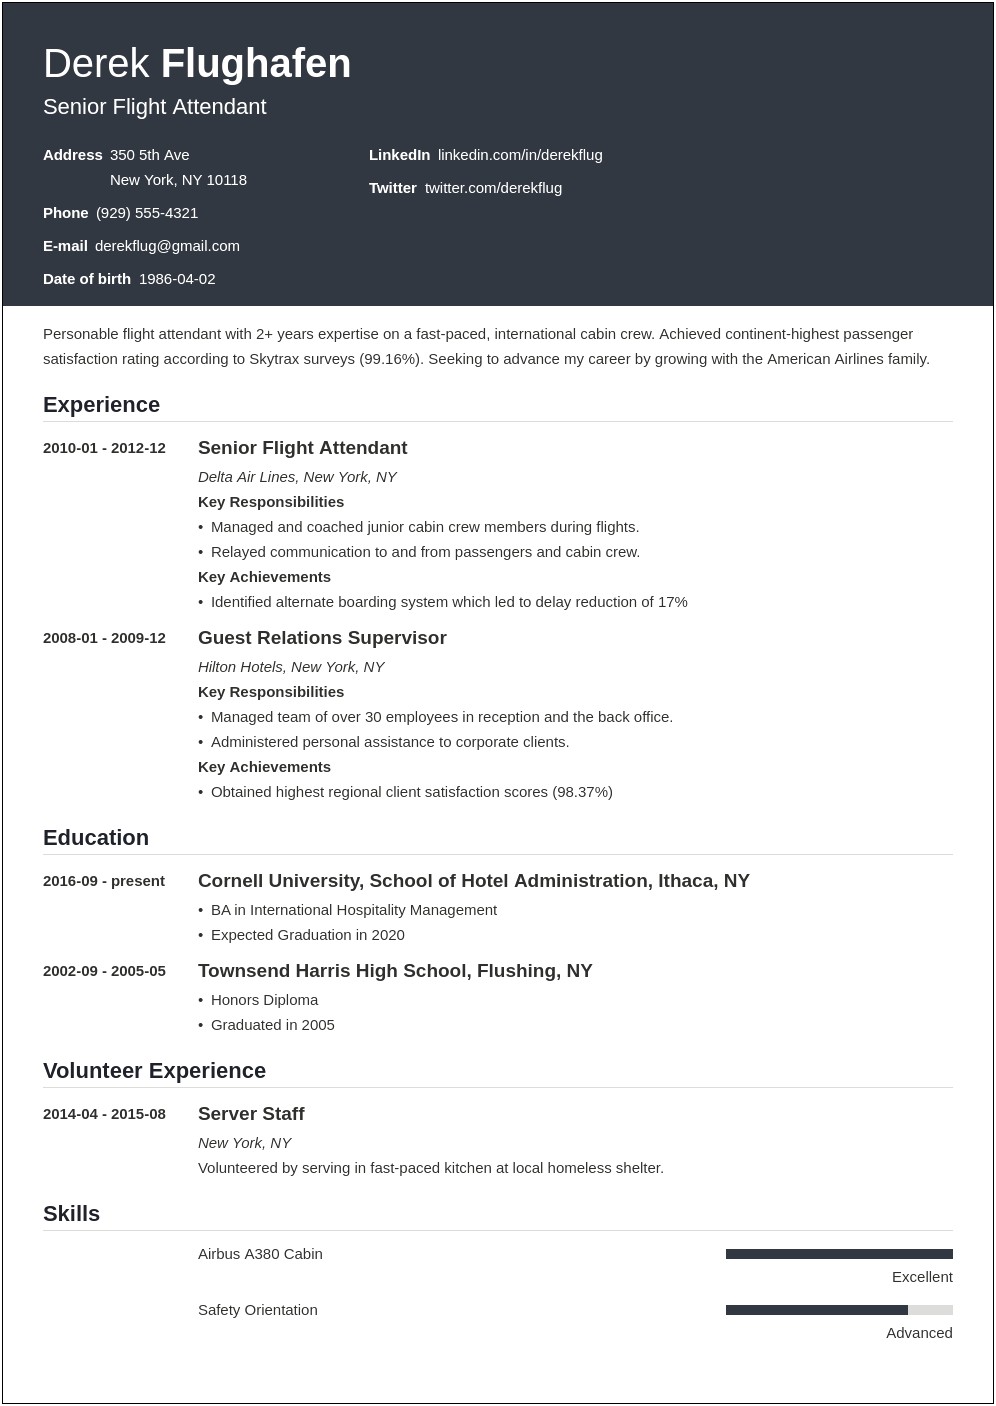 Functional Resume Objective Samples For Ramp Agent